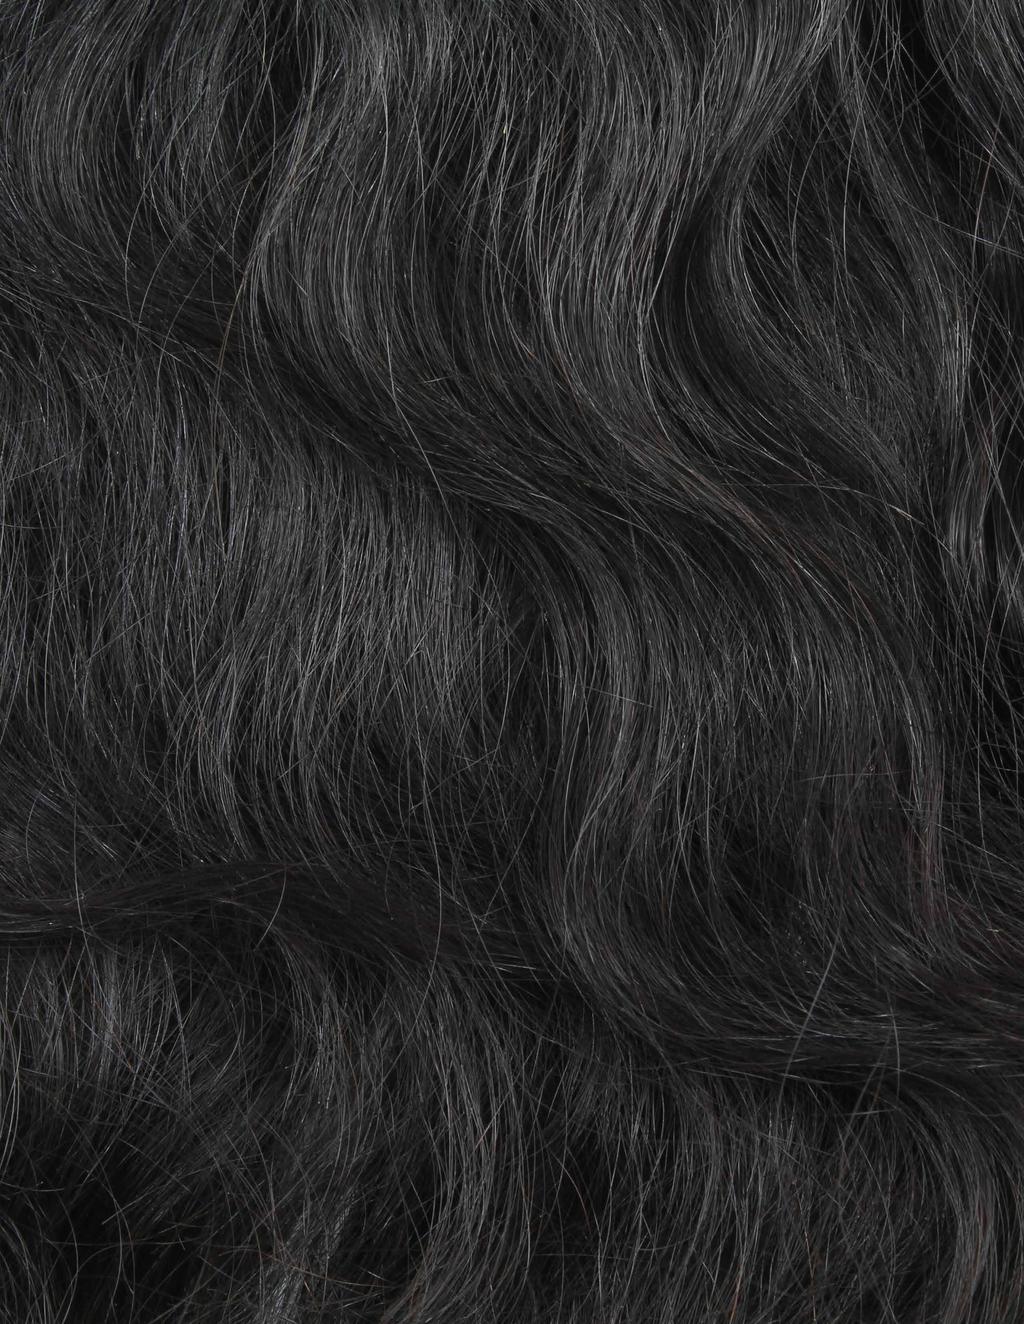 Introducing Indique ID powered by Myavana is a hair analysis platform that creates personalized hair care plans based on an individual s texture, type, and condition.